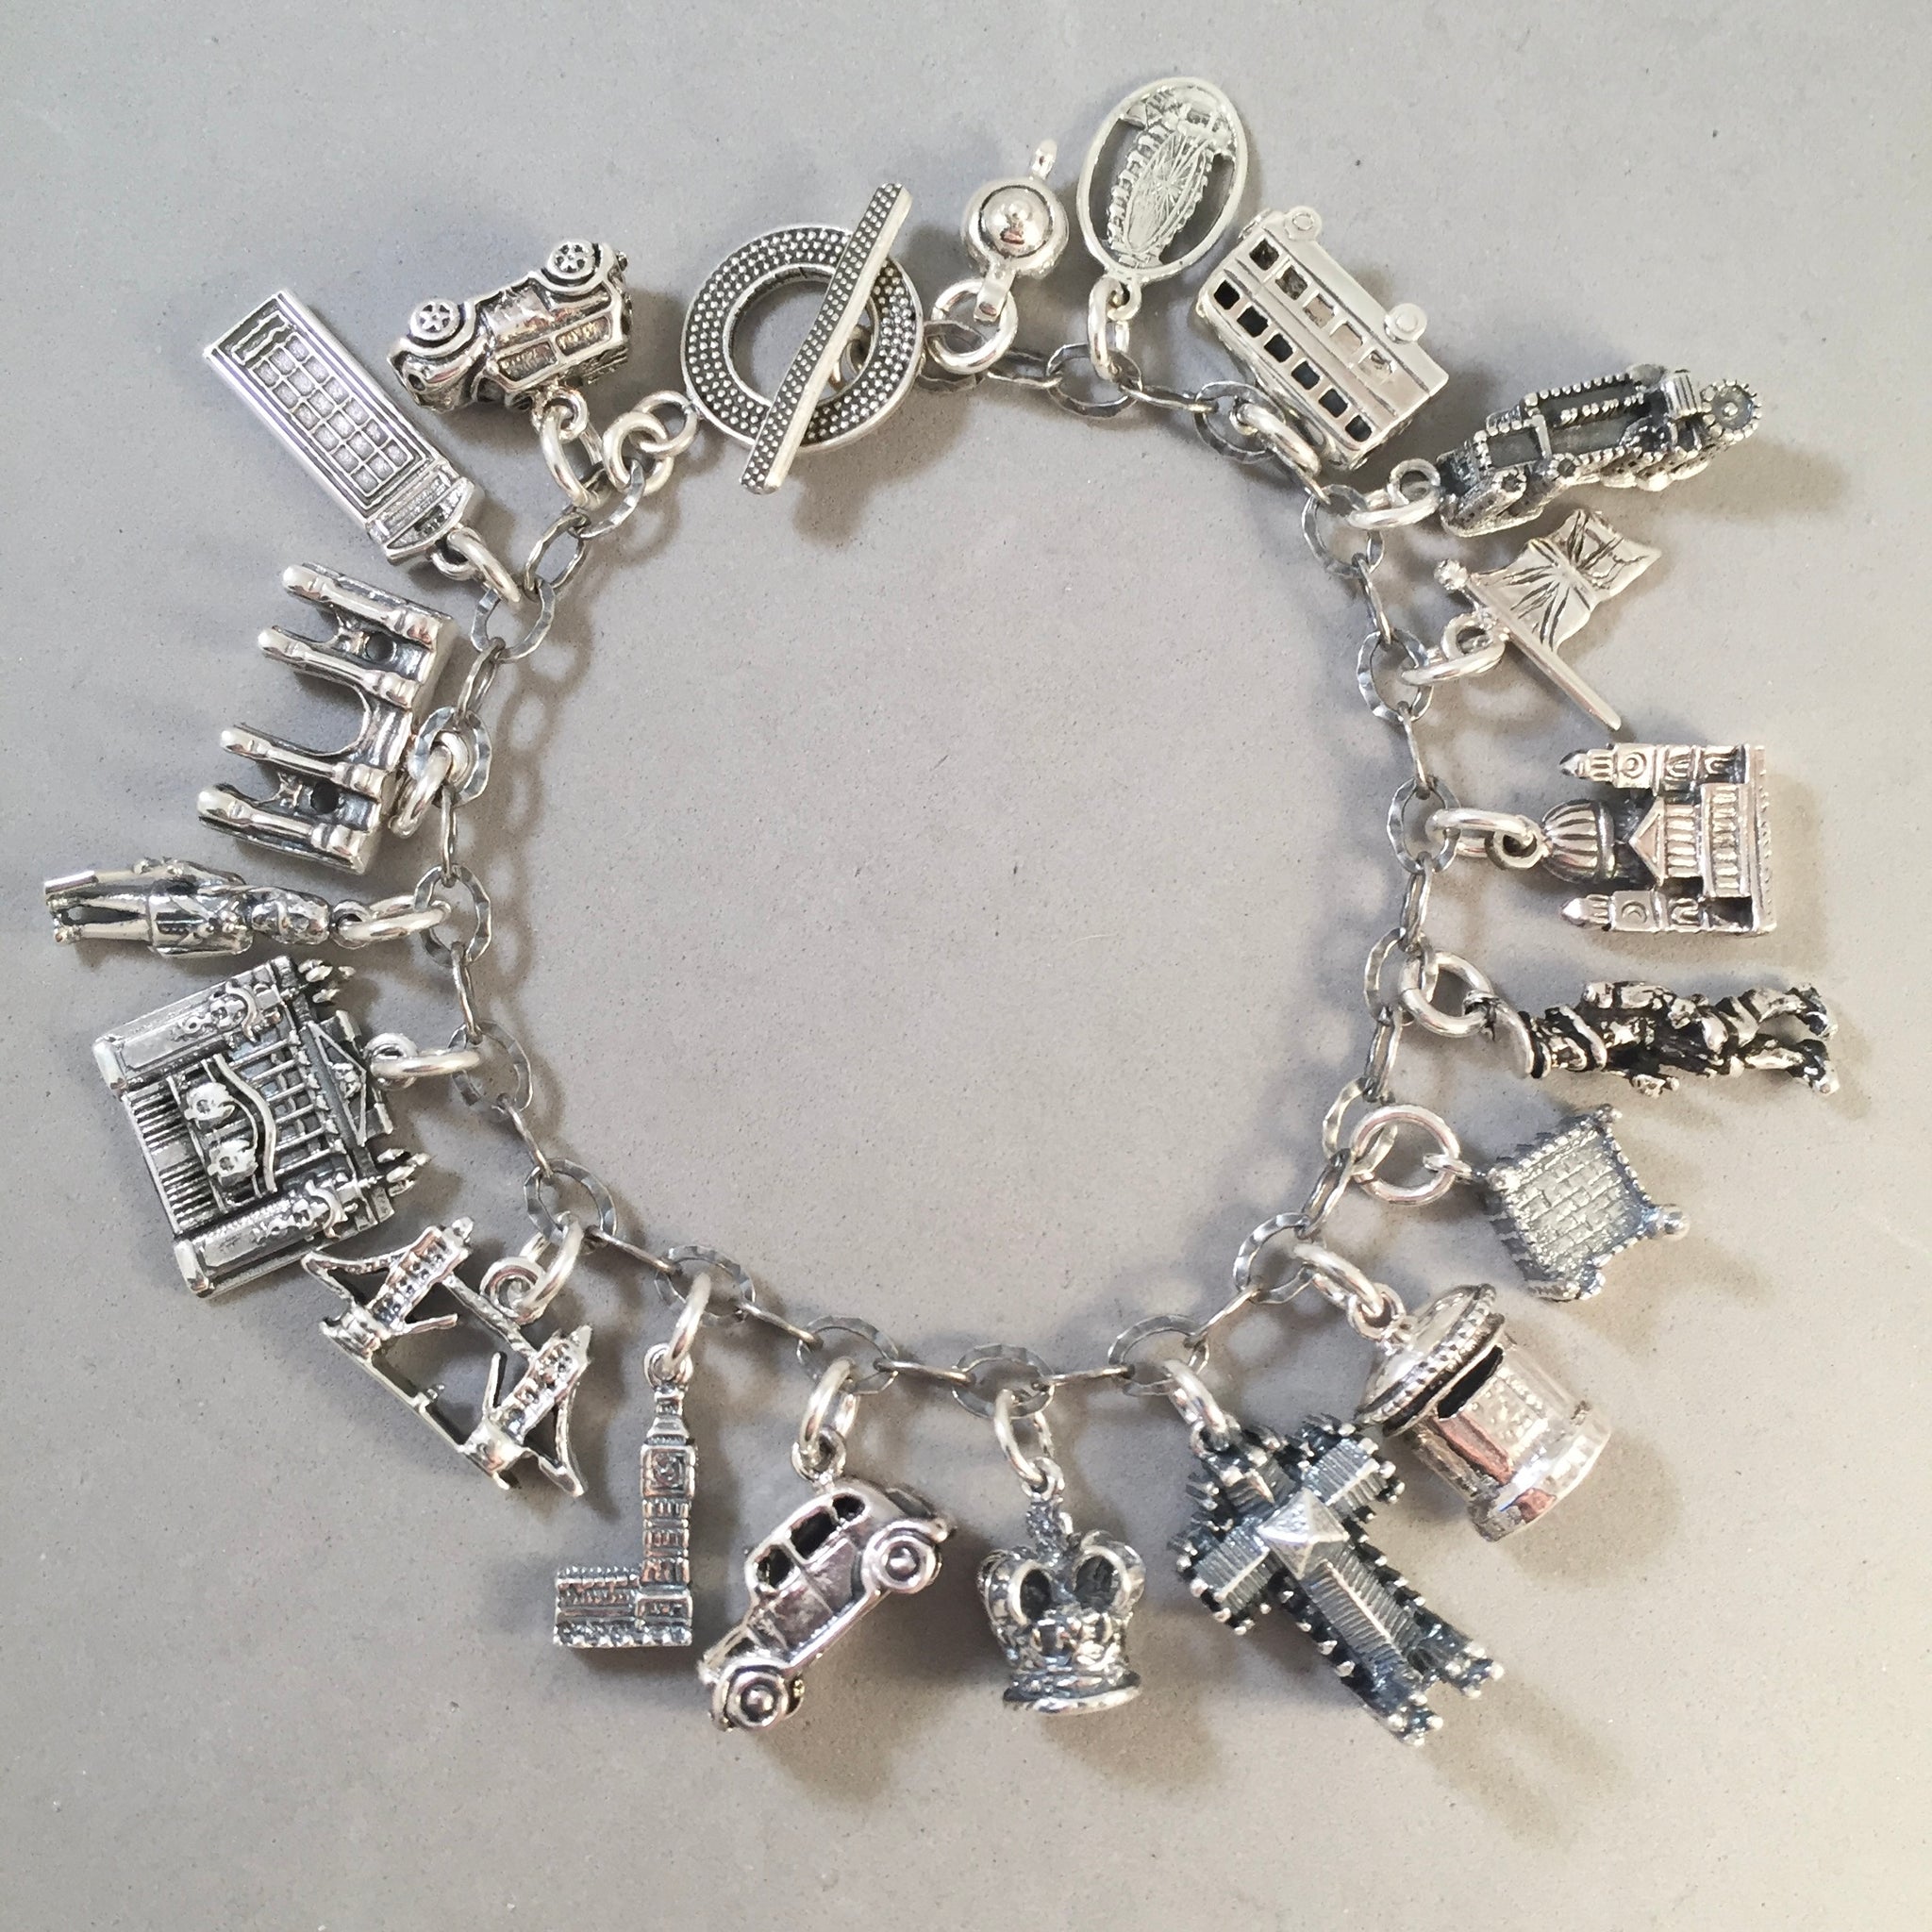 Make a Classic Charm Bracelet - Rings and ThingsRings and Things